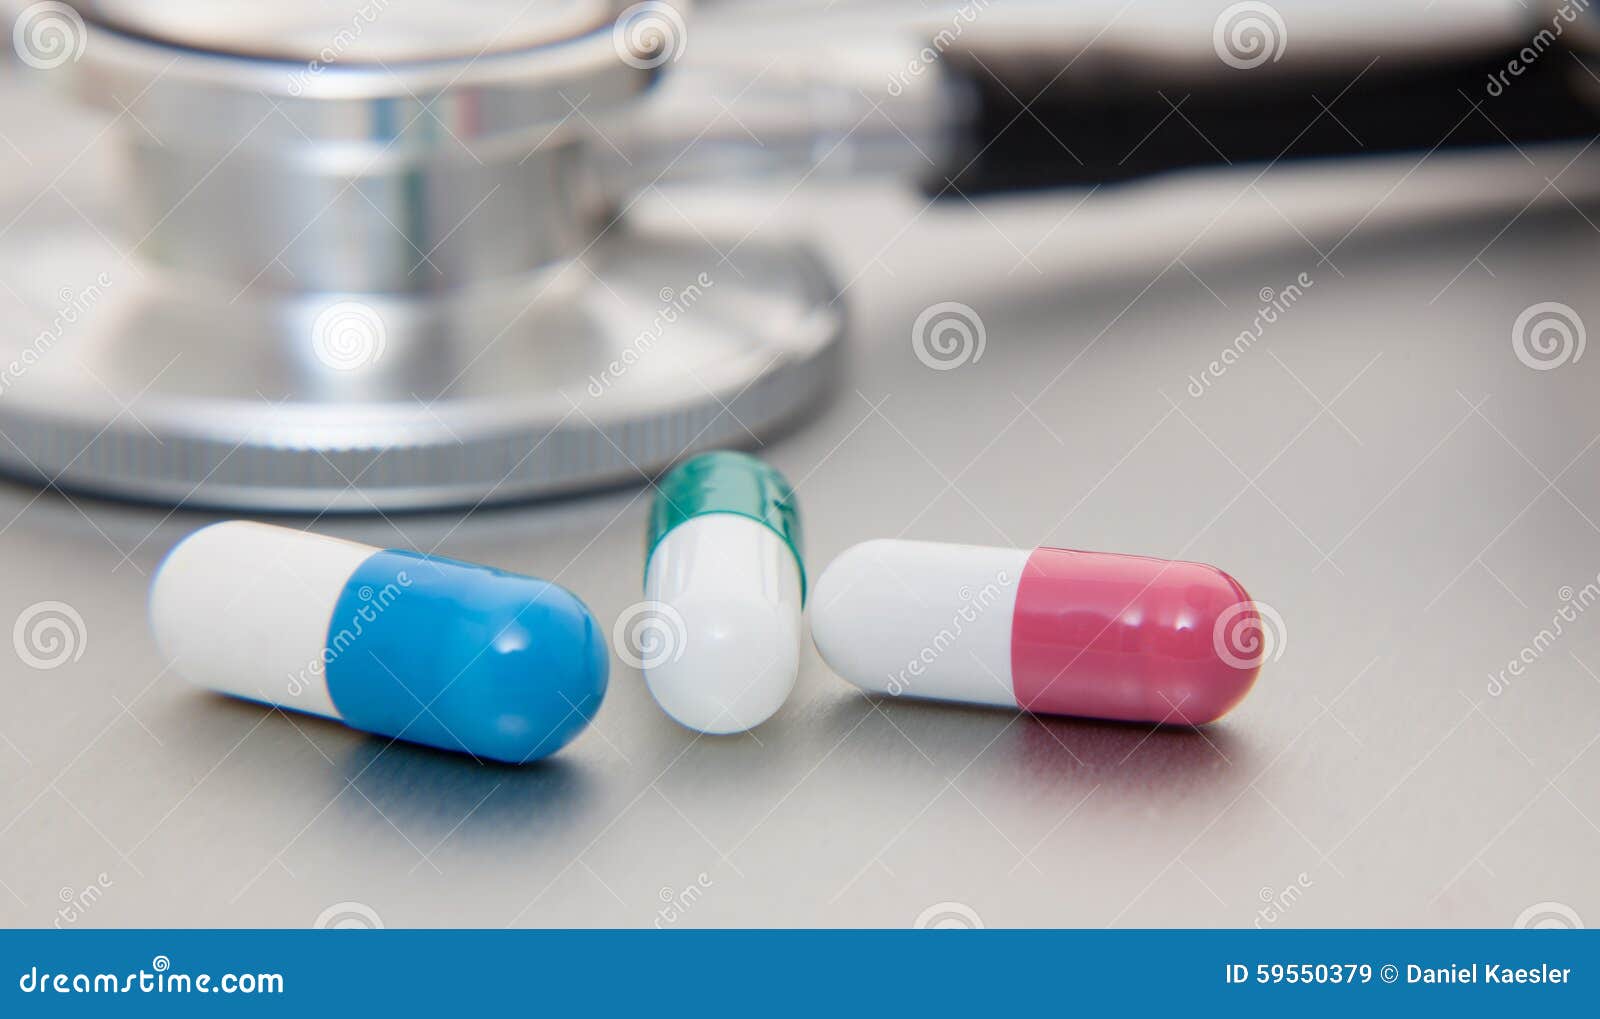 various pharmaceuticals on stainless steel